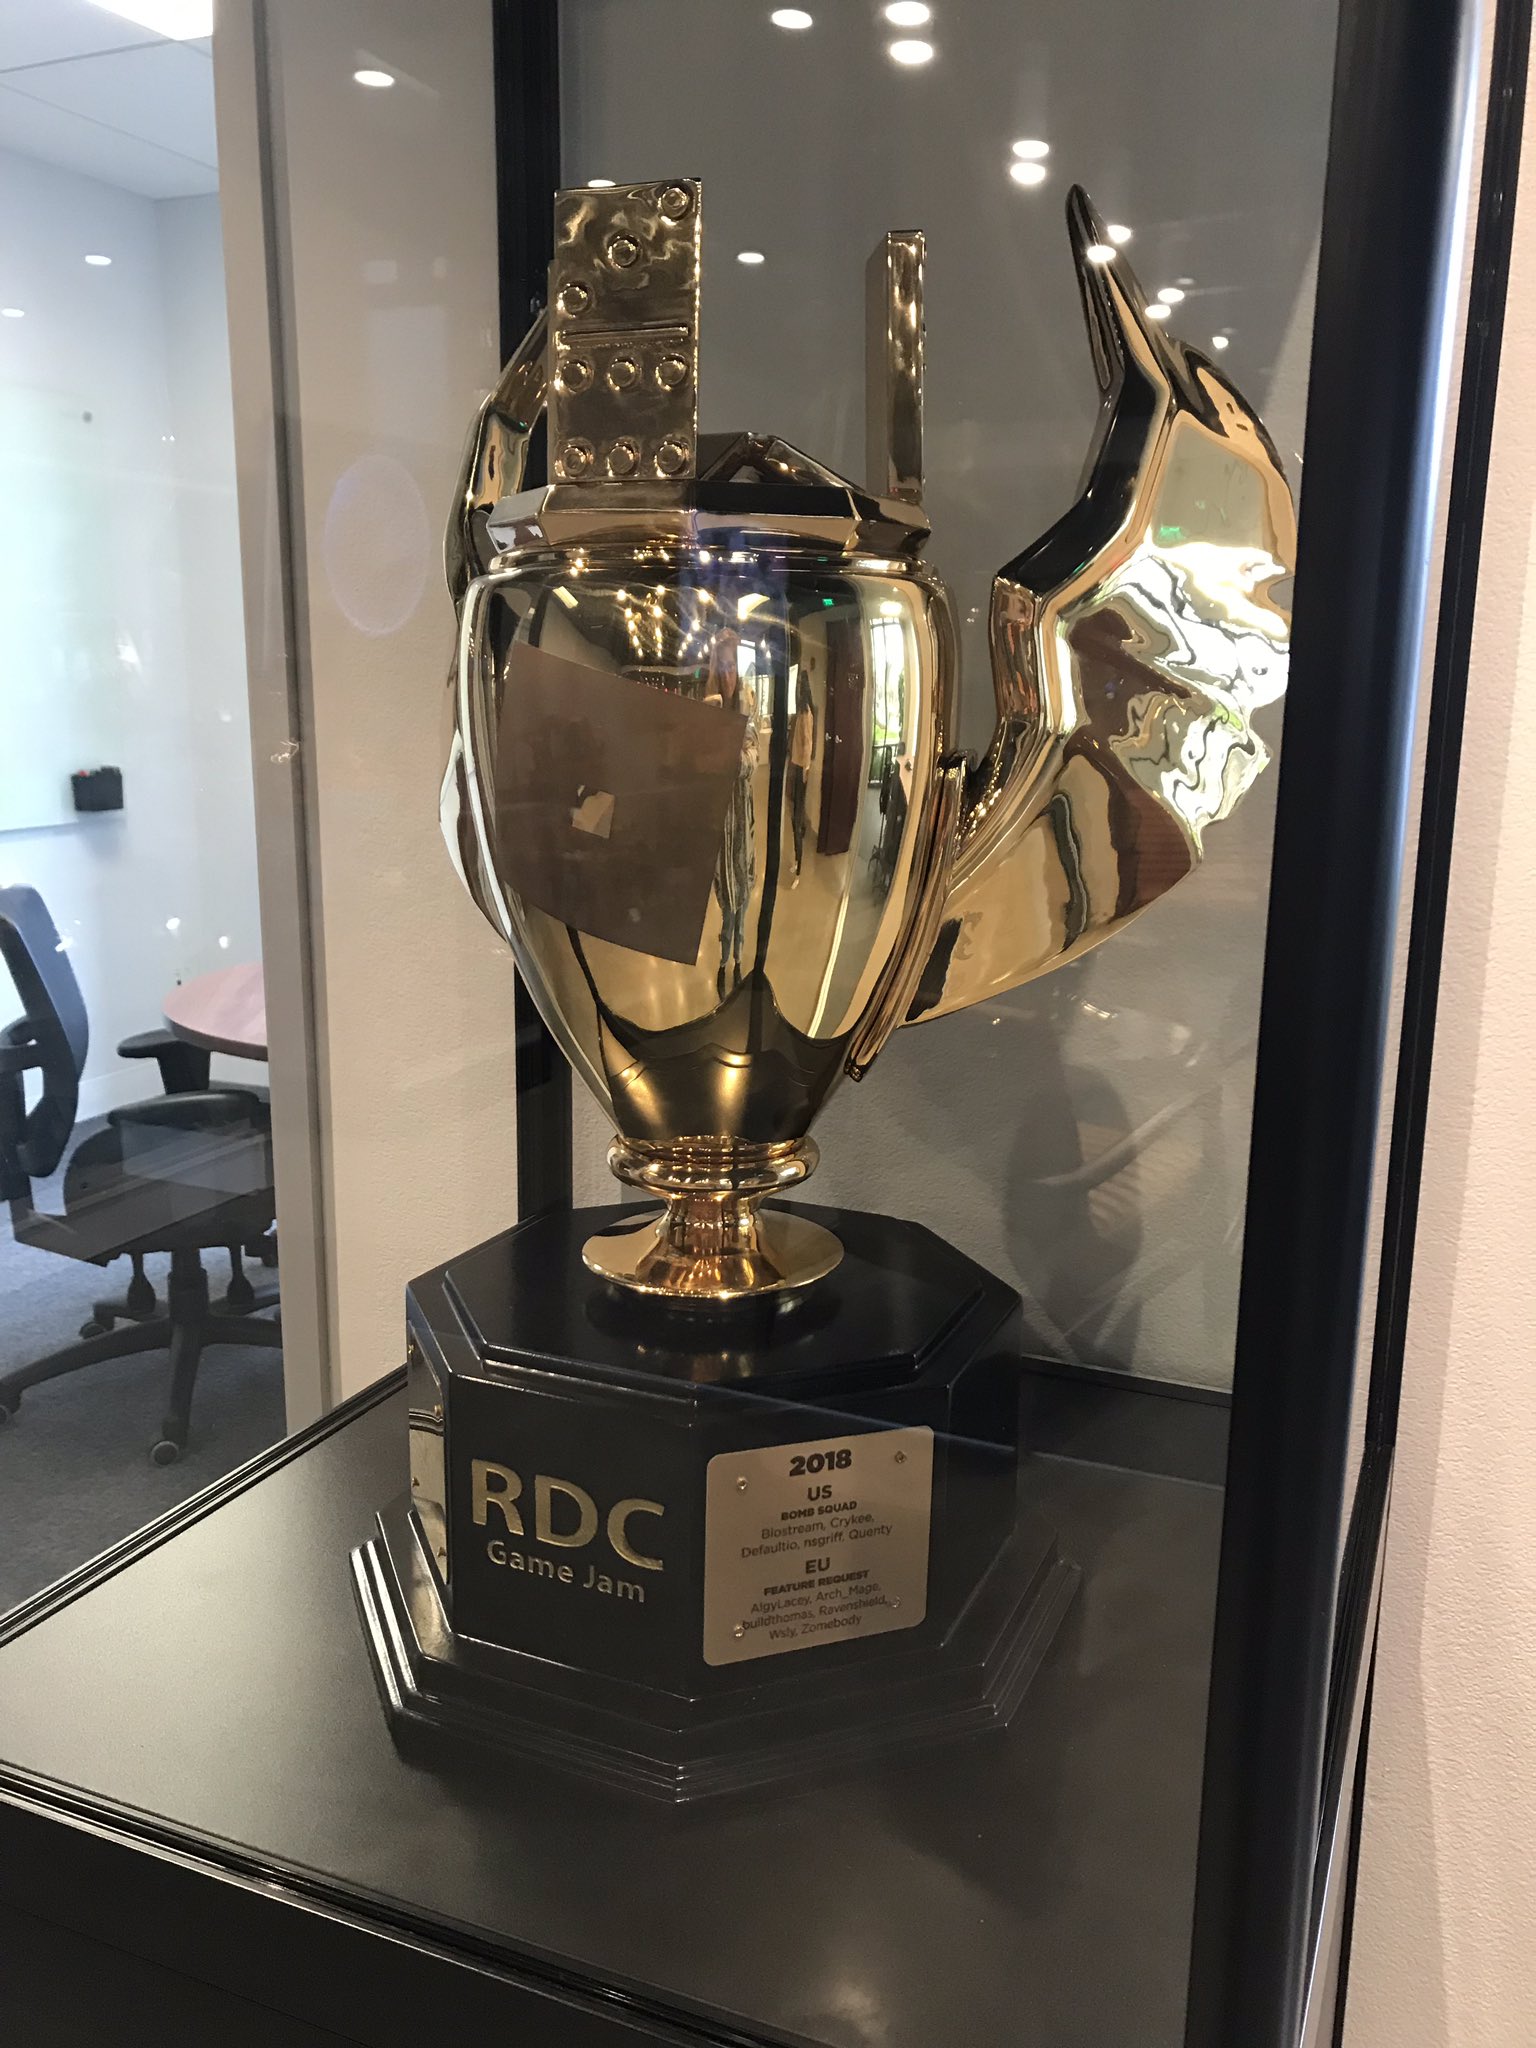 Roblox Developer Relations On Twitter Next Time You Visit Roblox Hq Be Sure To Stop By The Lobby And Check Out The Rdc2018 Game Jam Trophy The Winners Have Their Names Inscribed - uÅ¾ivatel roblox developer relations na twitteru we wanted